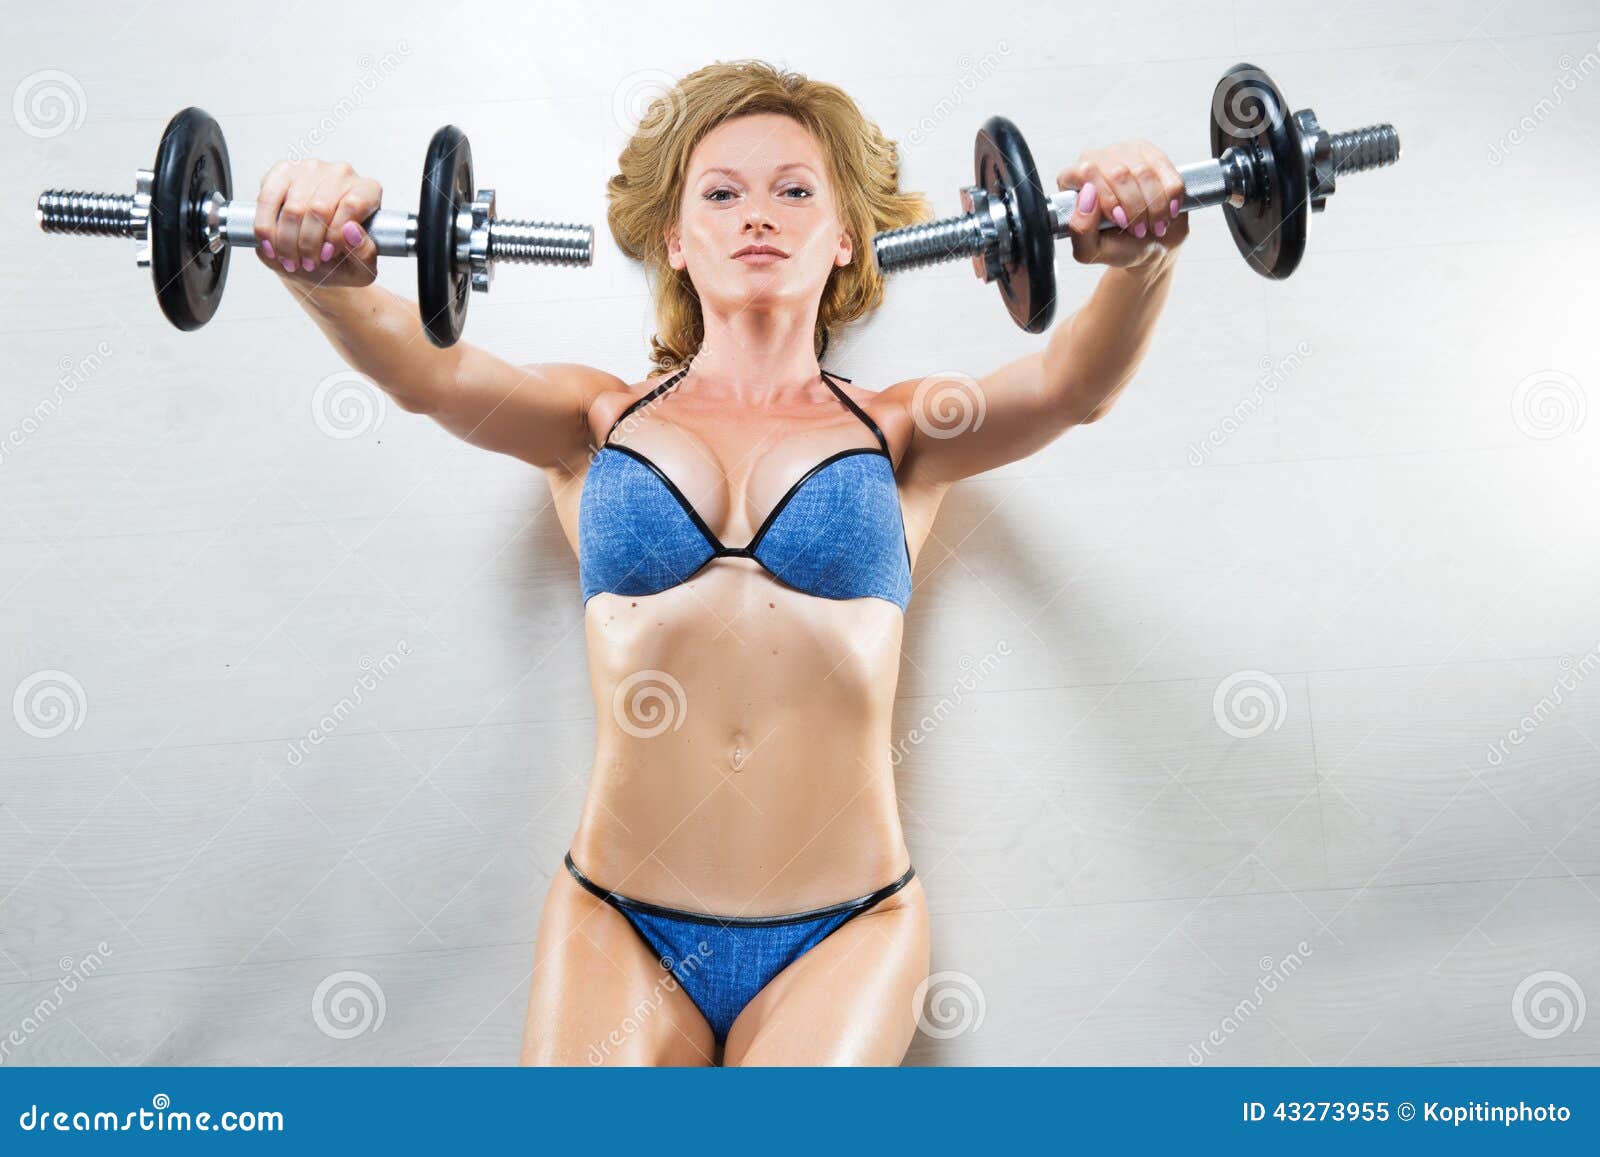 Athletic Woman Pumping Up Muscules with Dumbbells Stock Image